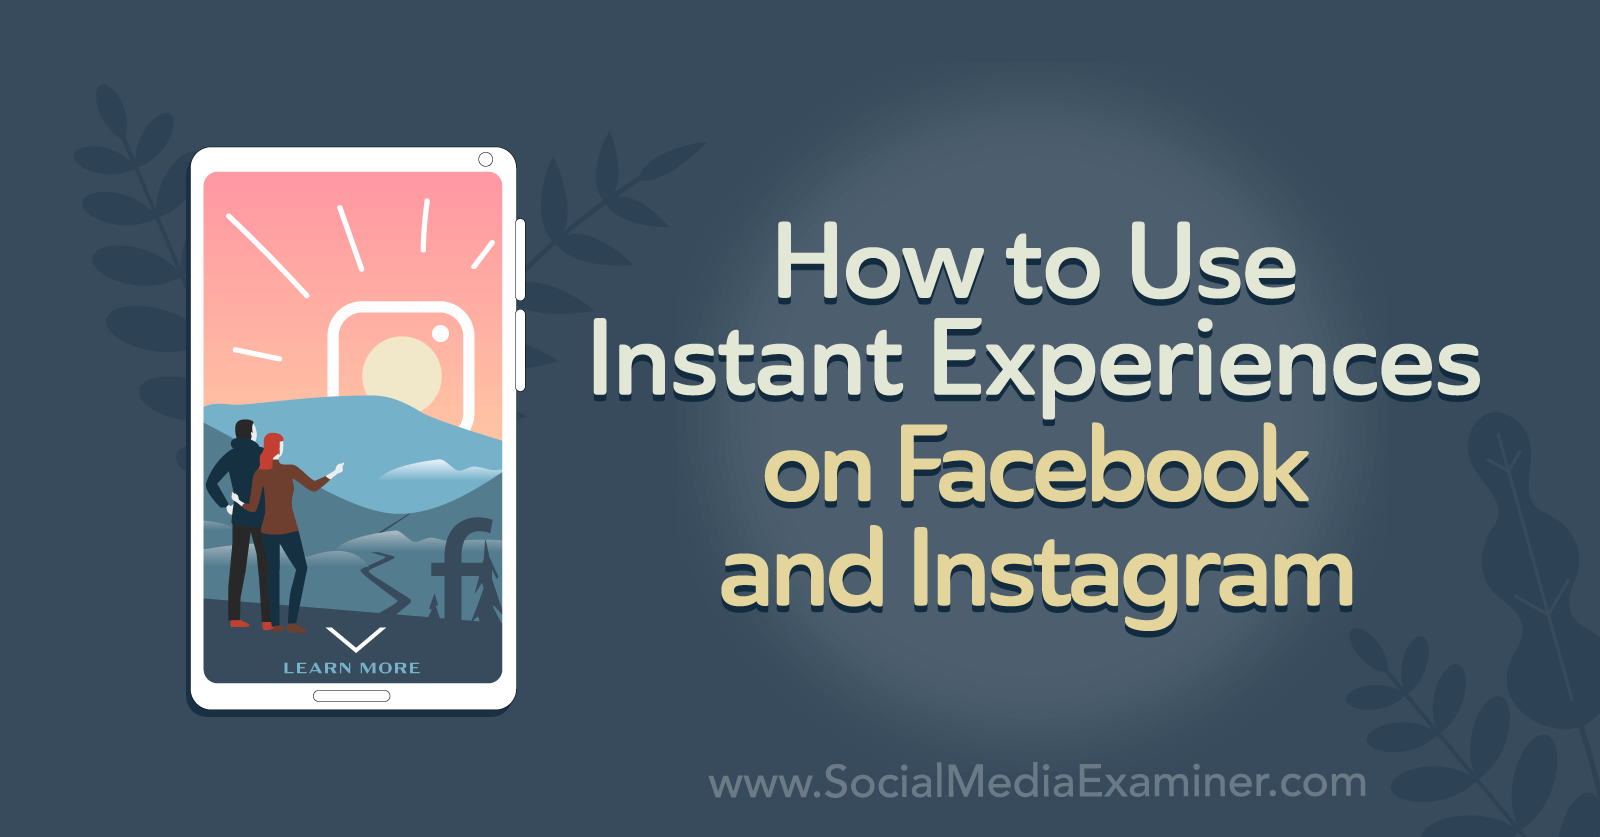 How to Use Instant Experiences on Facebook and Instagram by Corinna Keefe